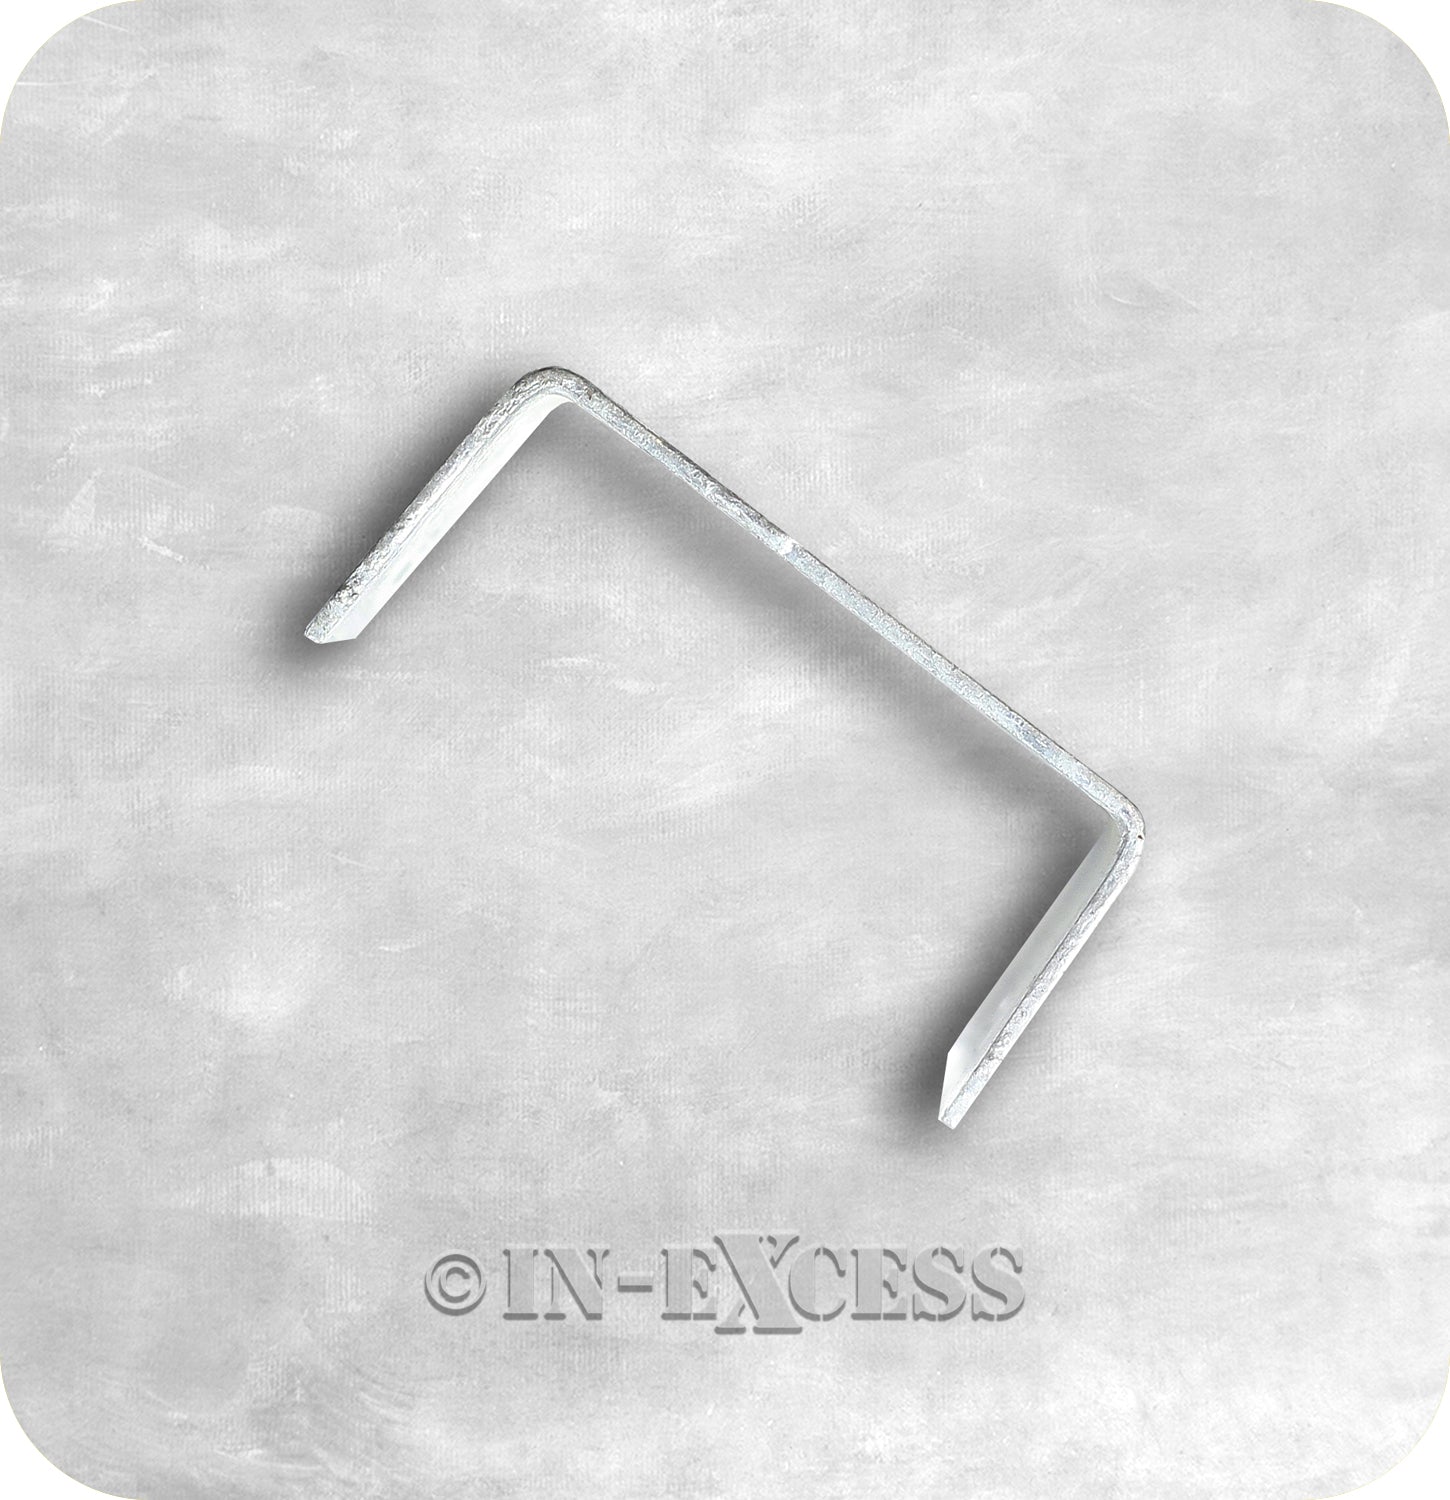 In-Excess Hardware Galvanised Fence Panel Fixing Fencing U-Clips - 55mm